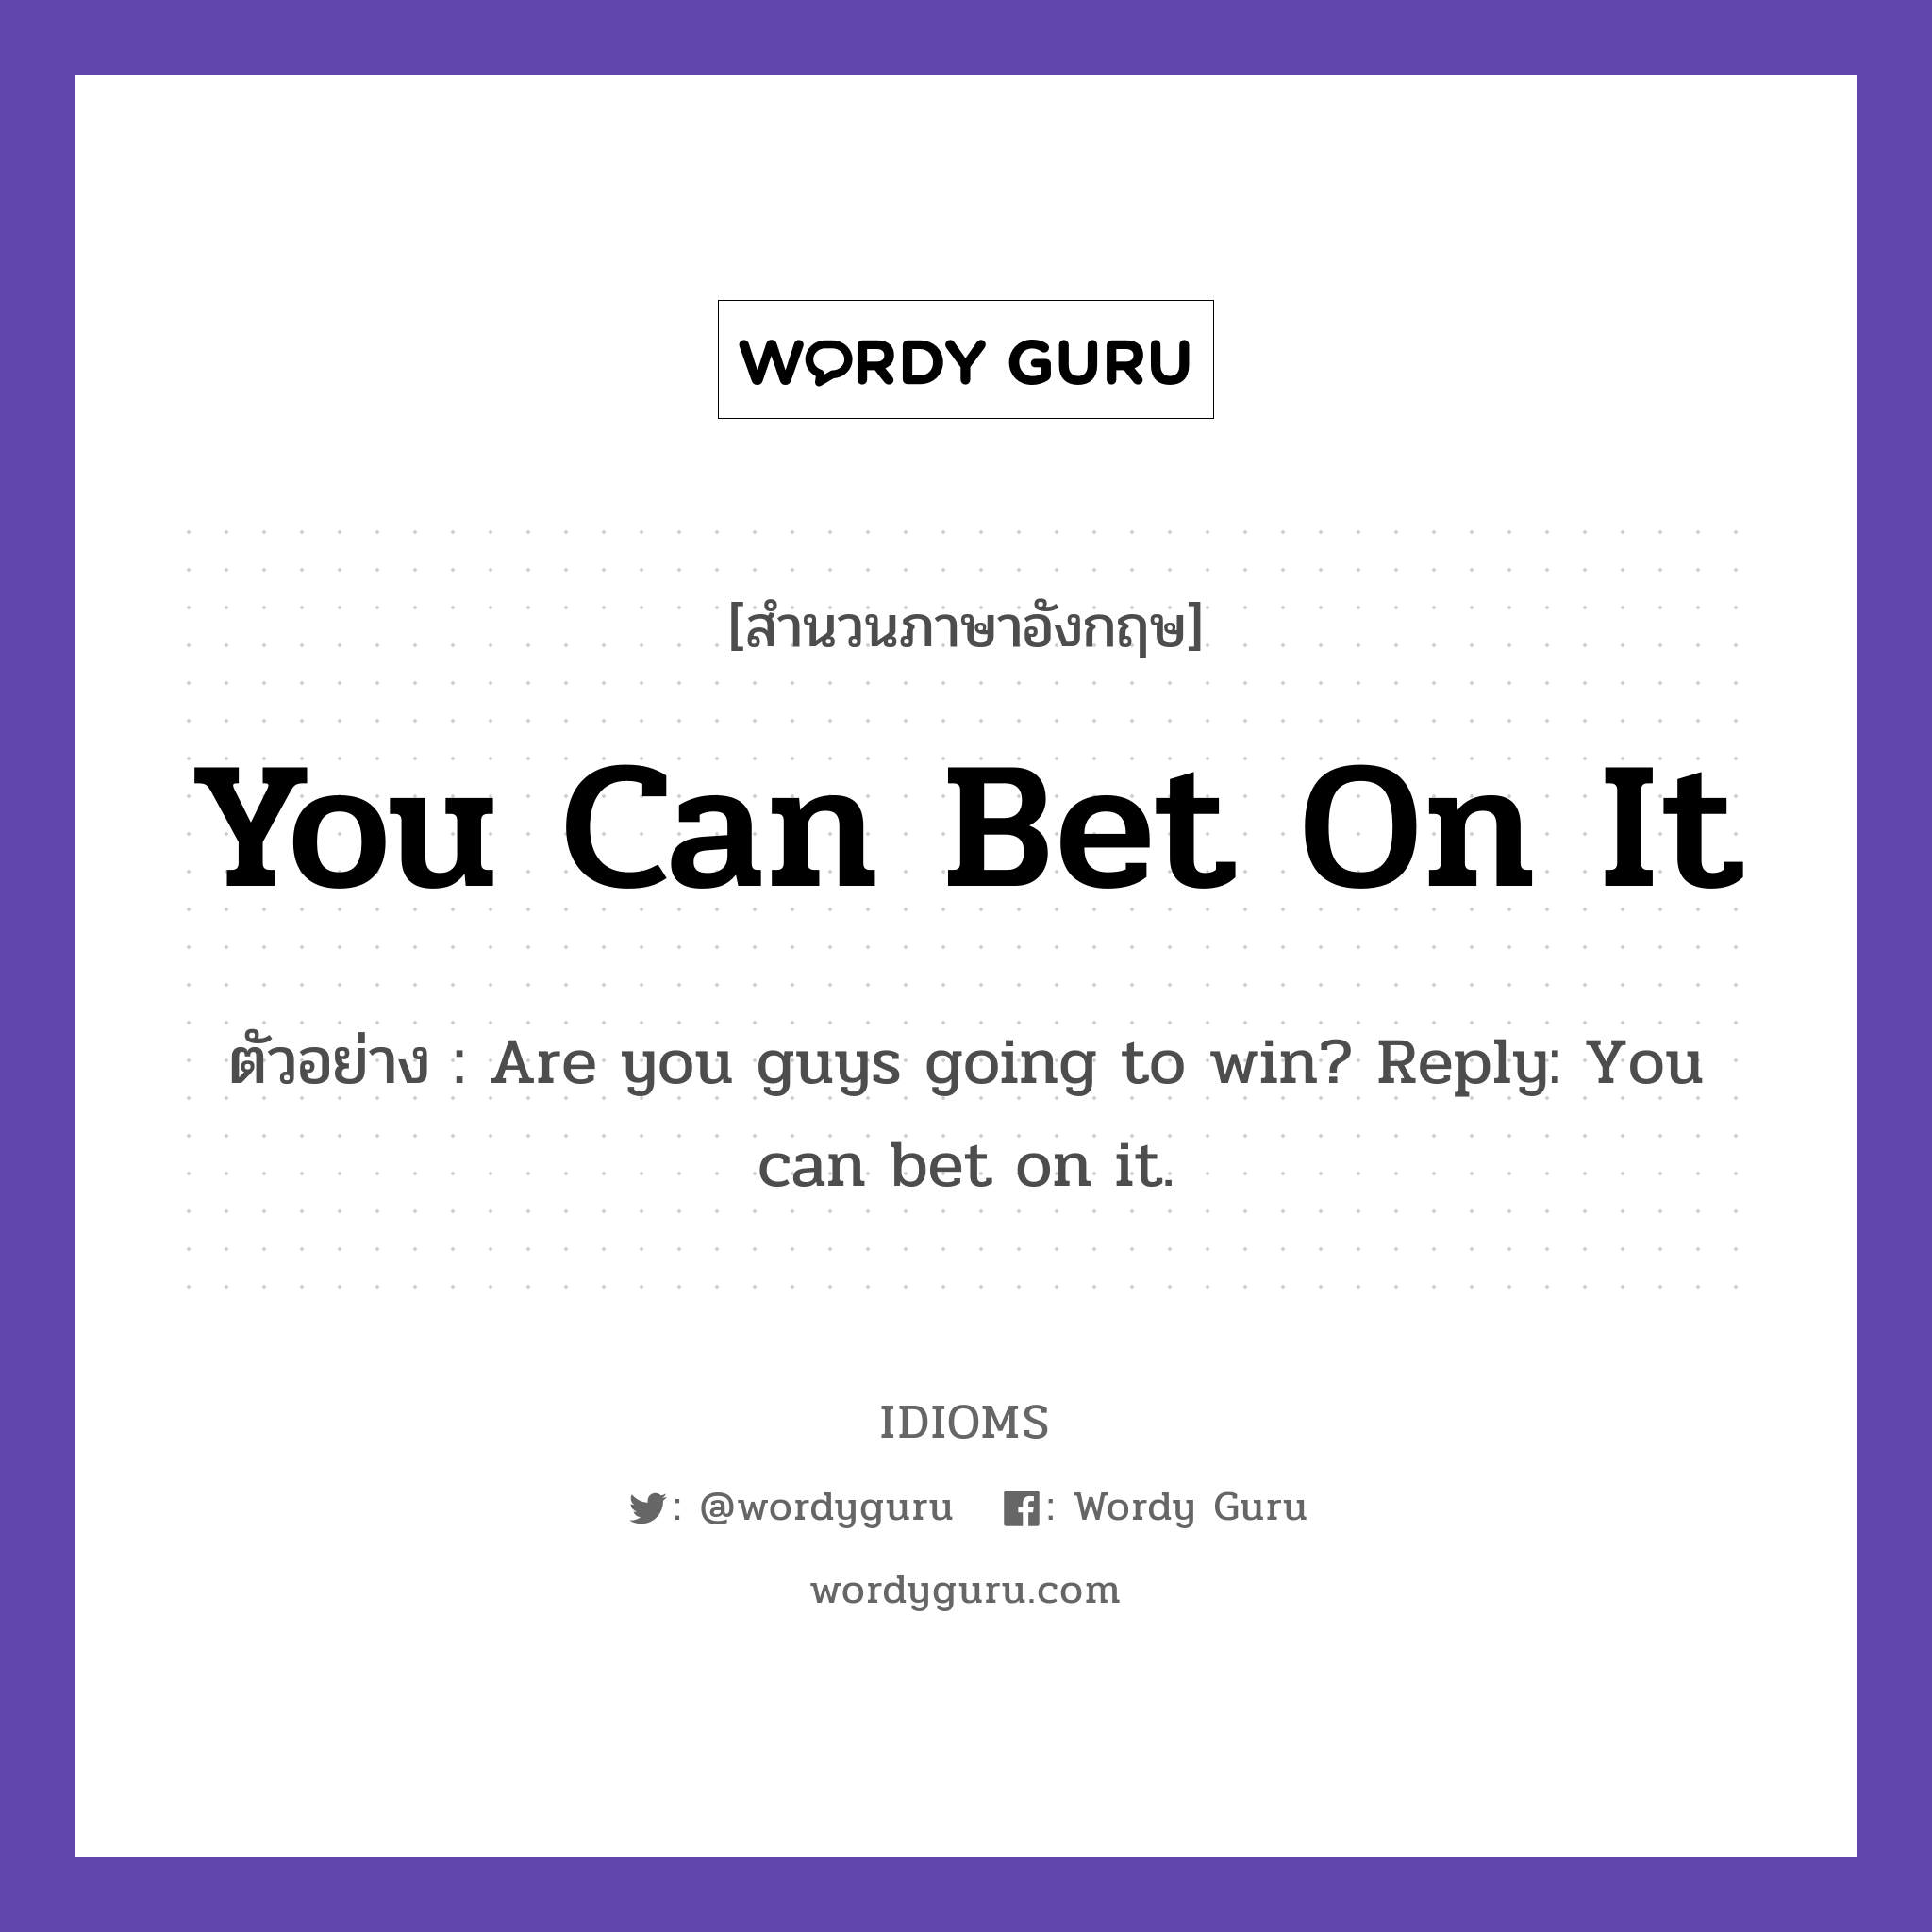 You Can Bet On It แปลว่า?, สำนวนภาษาอังกฤษ You Can Bet On It ตัวอย่าง Are you guys going to win? Reply: You can bet on it.